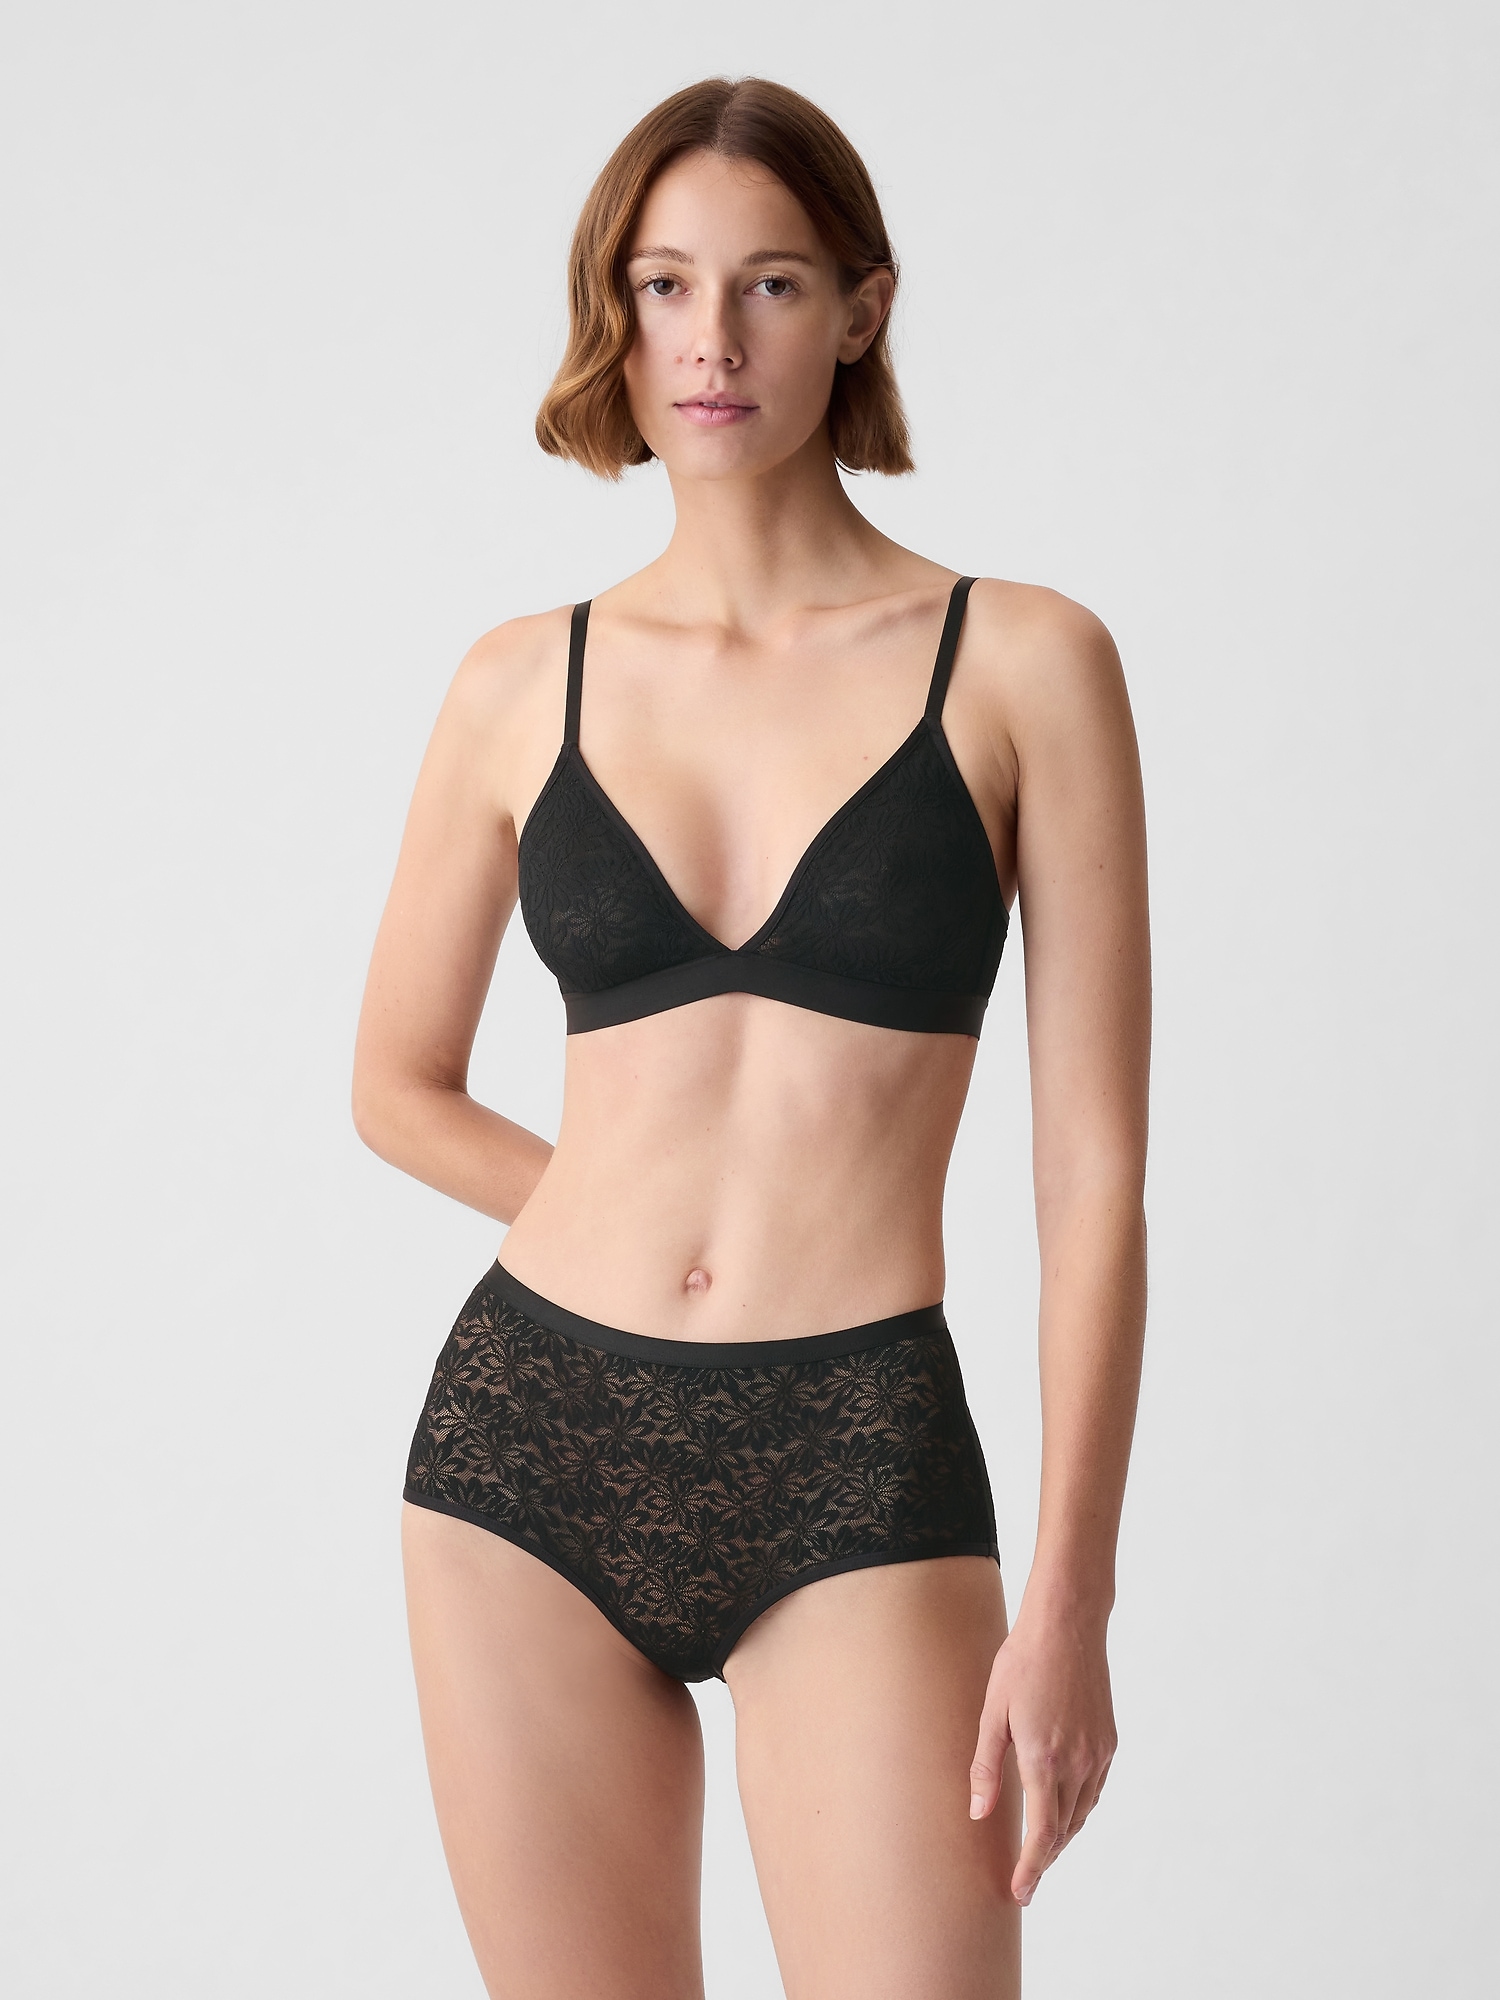 Shop Gap Lace Bralettes up to 60% Off